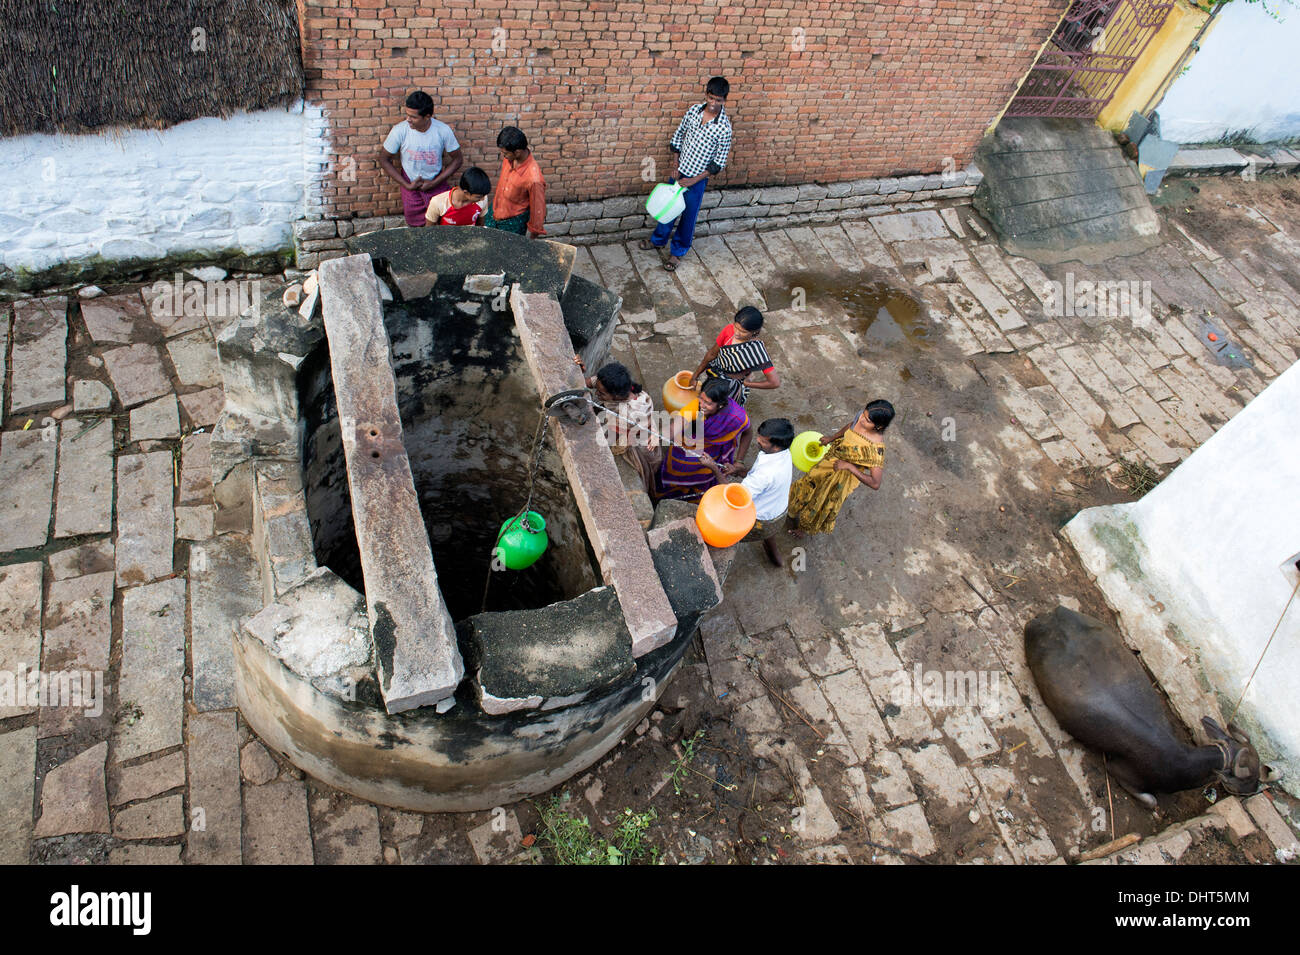 Indian women, men and children drawing water from a well in a rural Indian village street. Andhra Pradesh, India Stock Photo